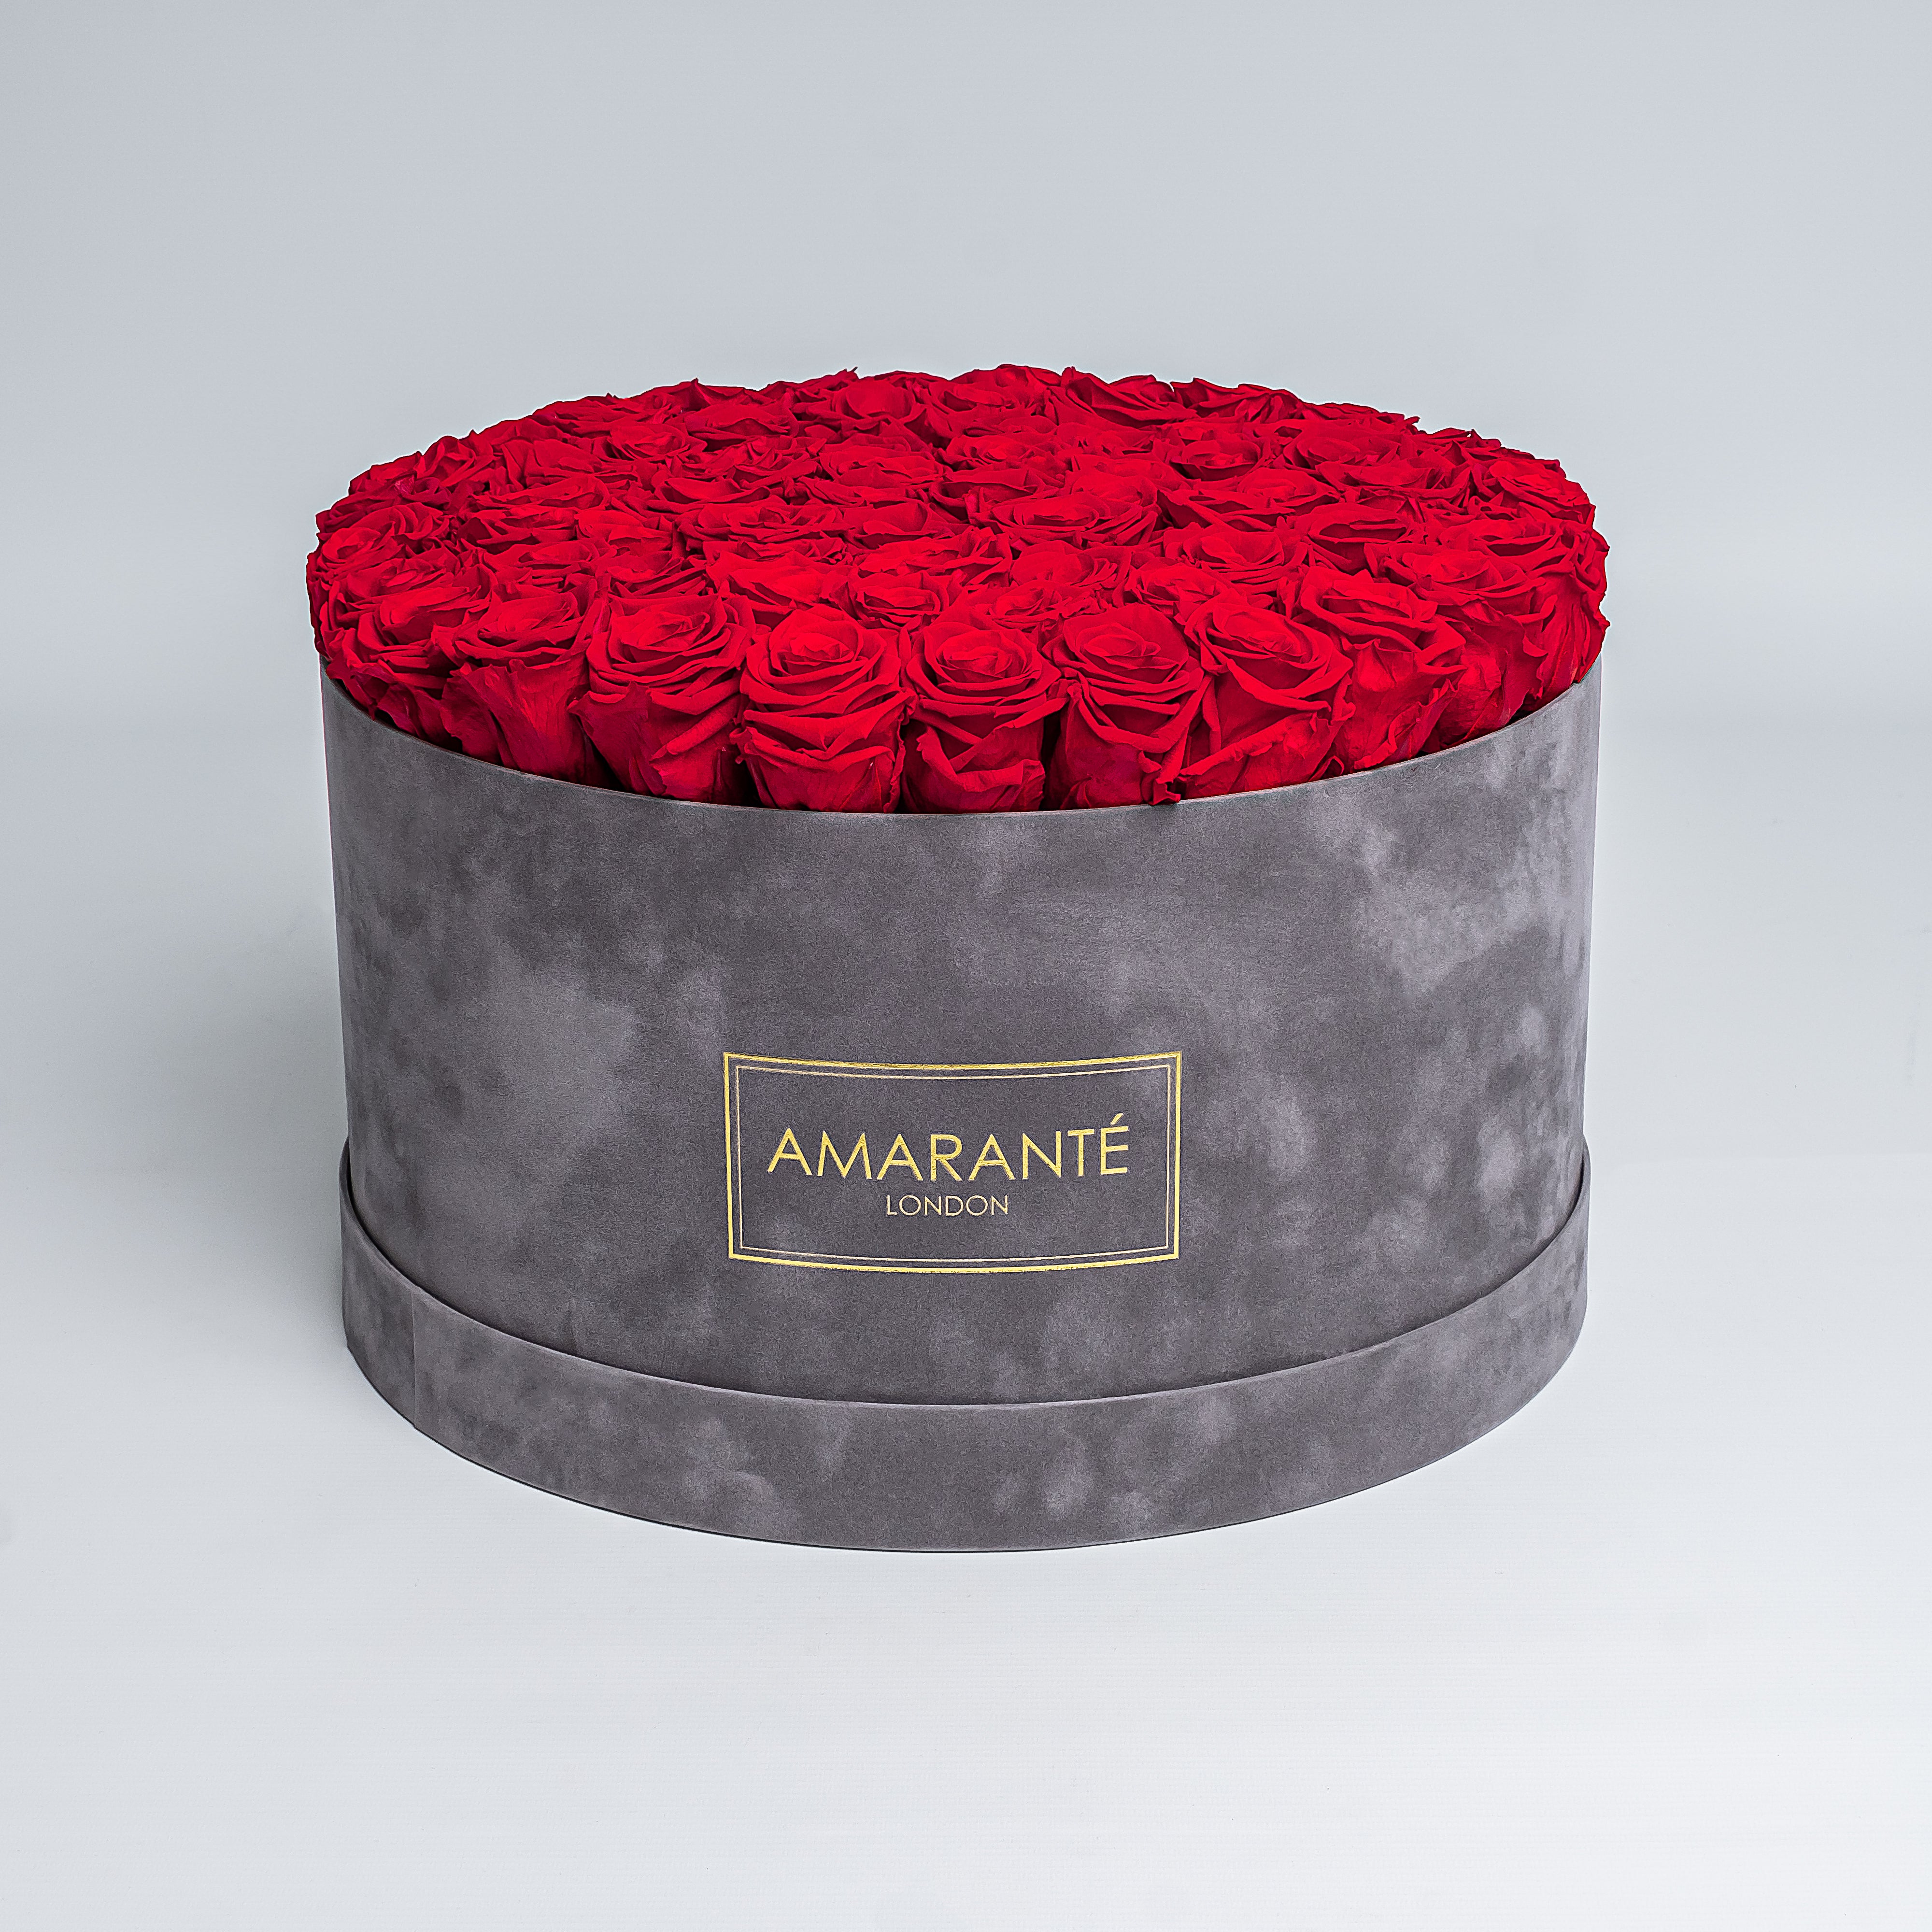 Elegant light red Infinity Roses artistically arranged in a trendy round grey suede rose box. This mesmerising, luxurious gift can be delivered for free in the UK, perfect for showing timeless love and affection to family, friends, or your significant other.